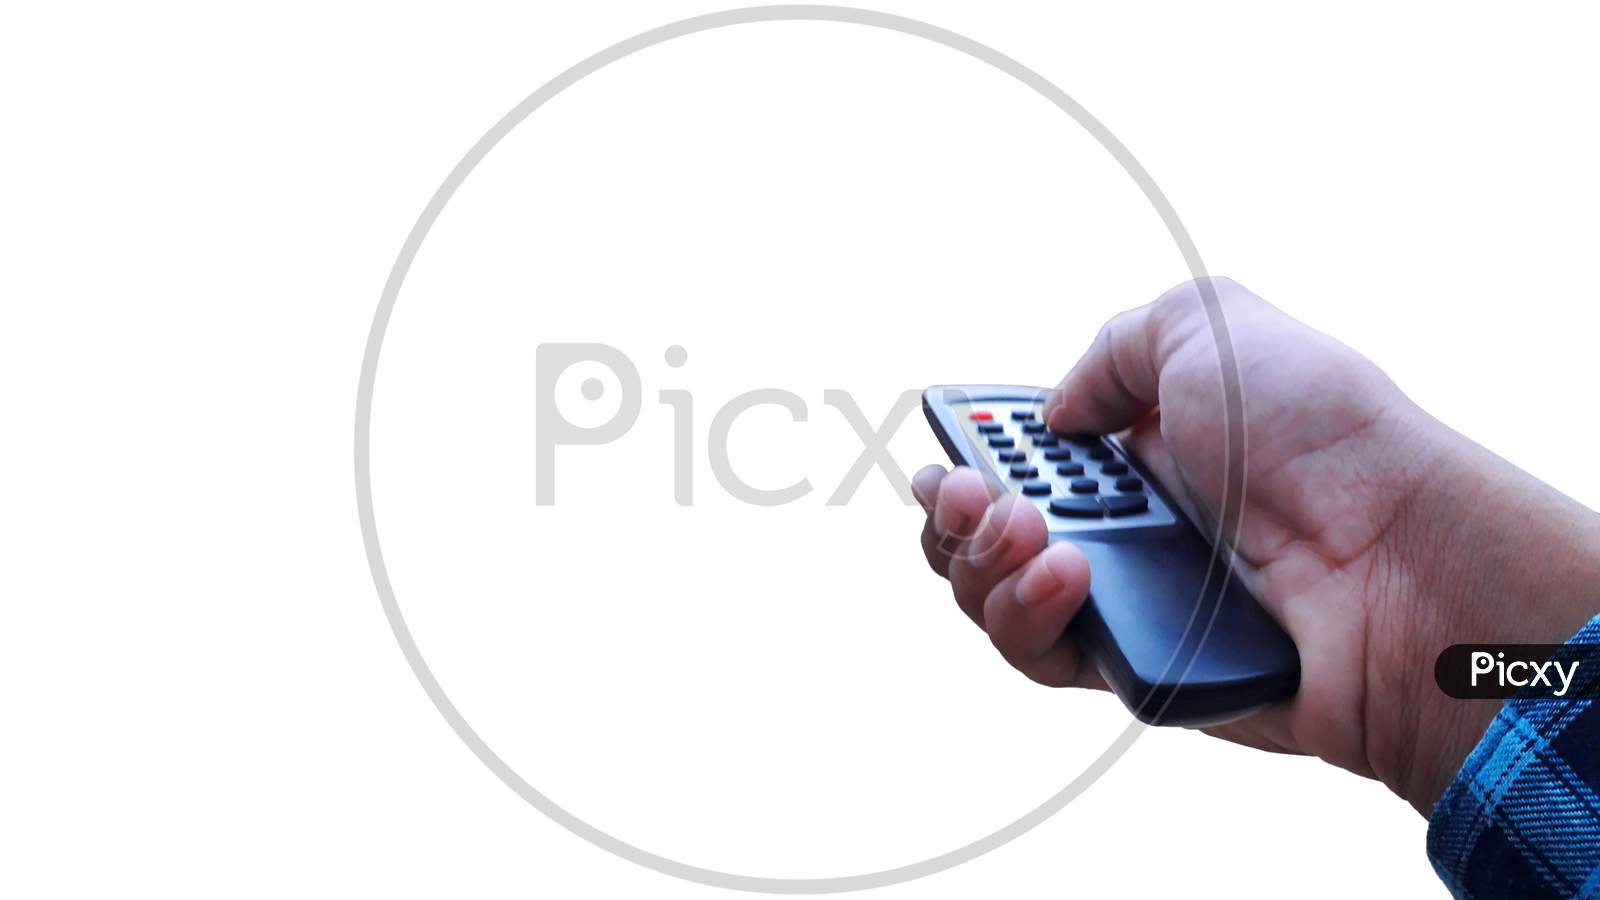 A man holding the TV remote in his hand and pressing its button isolated image in white background